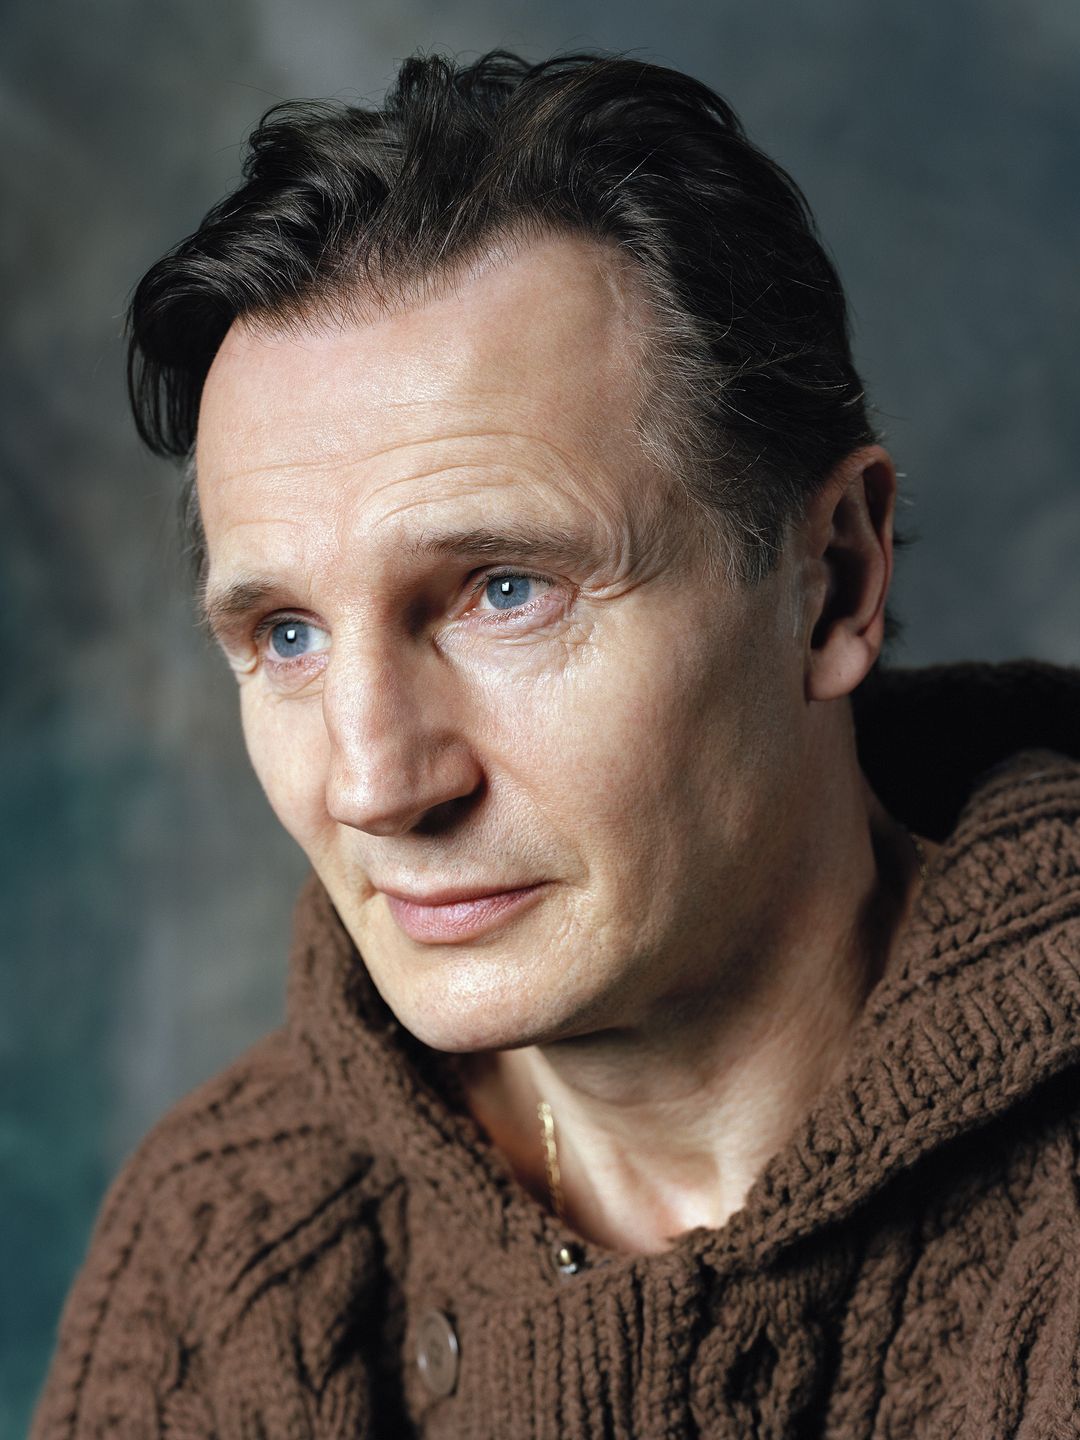 Liam Neeson who is his father